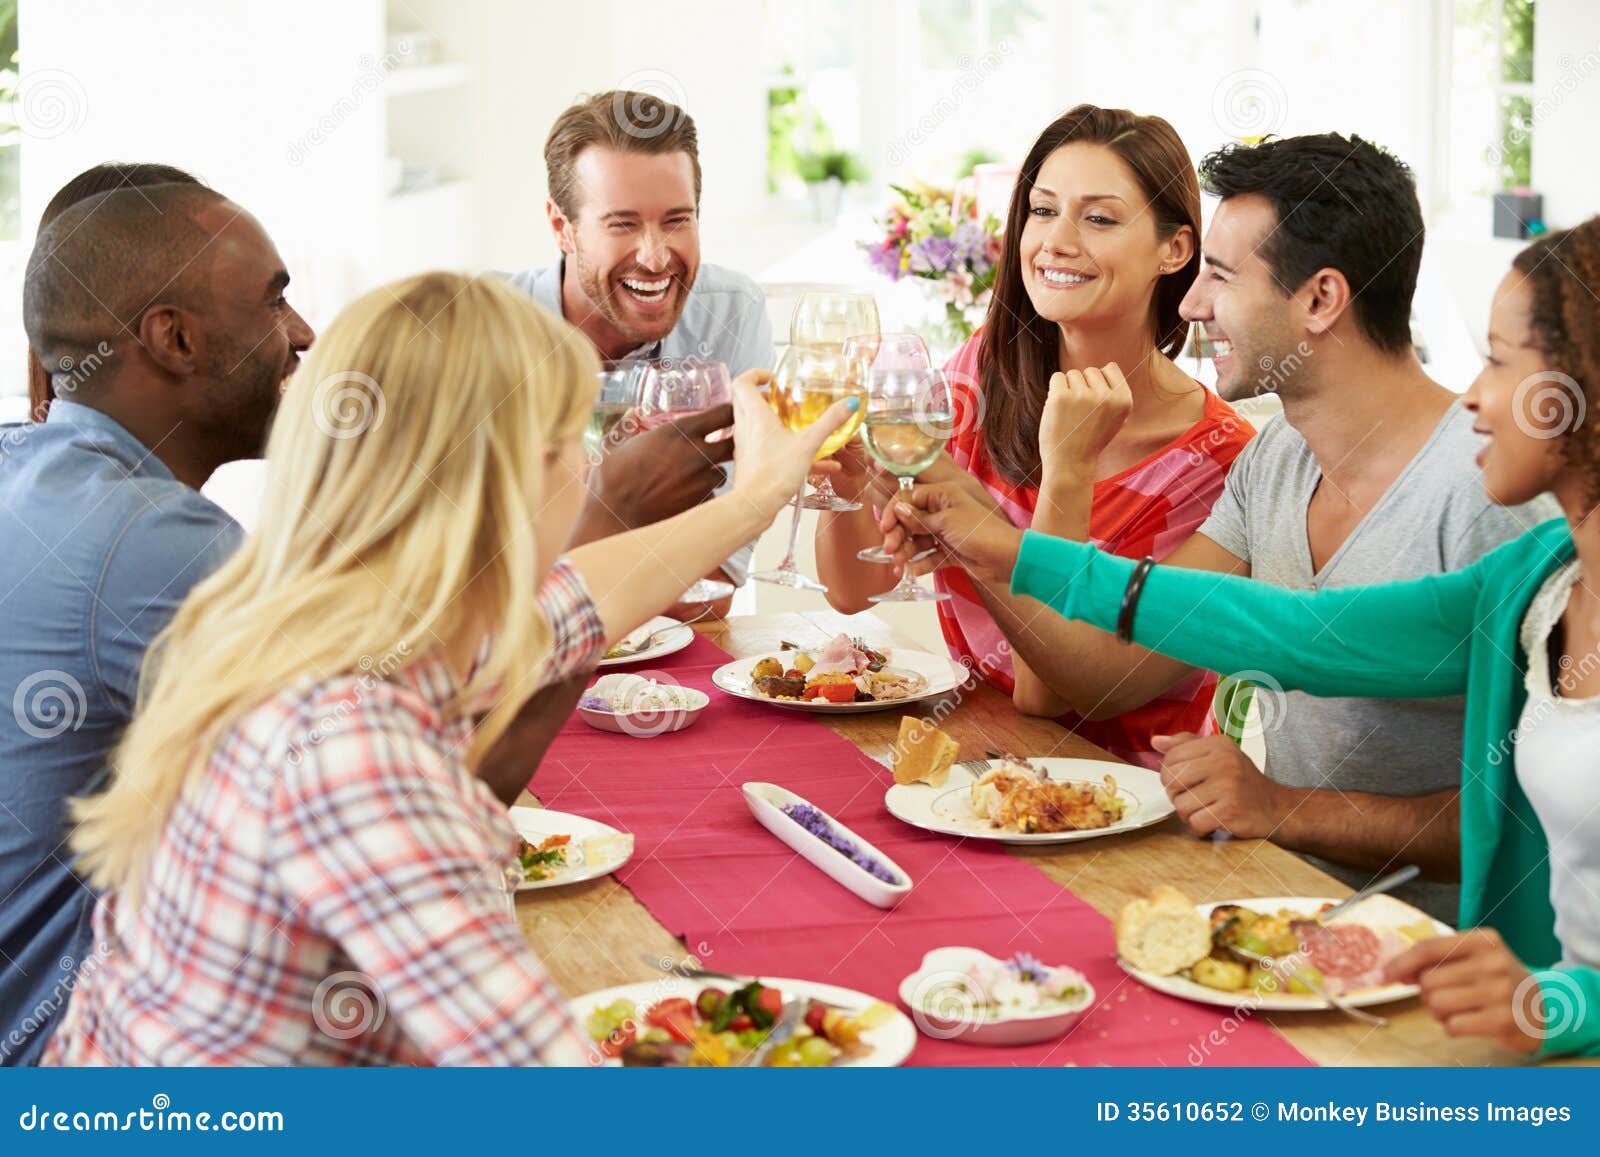 Group Of Friends Making Toast Around Table At Dinner Party Stock Photo